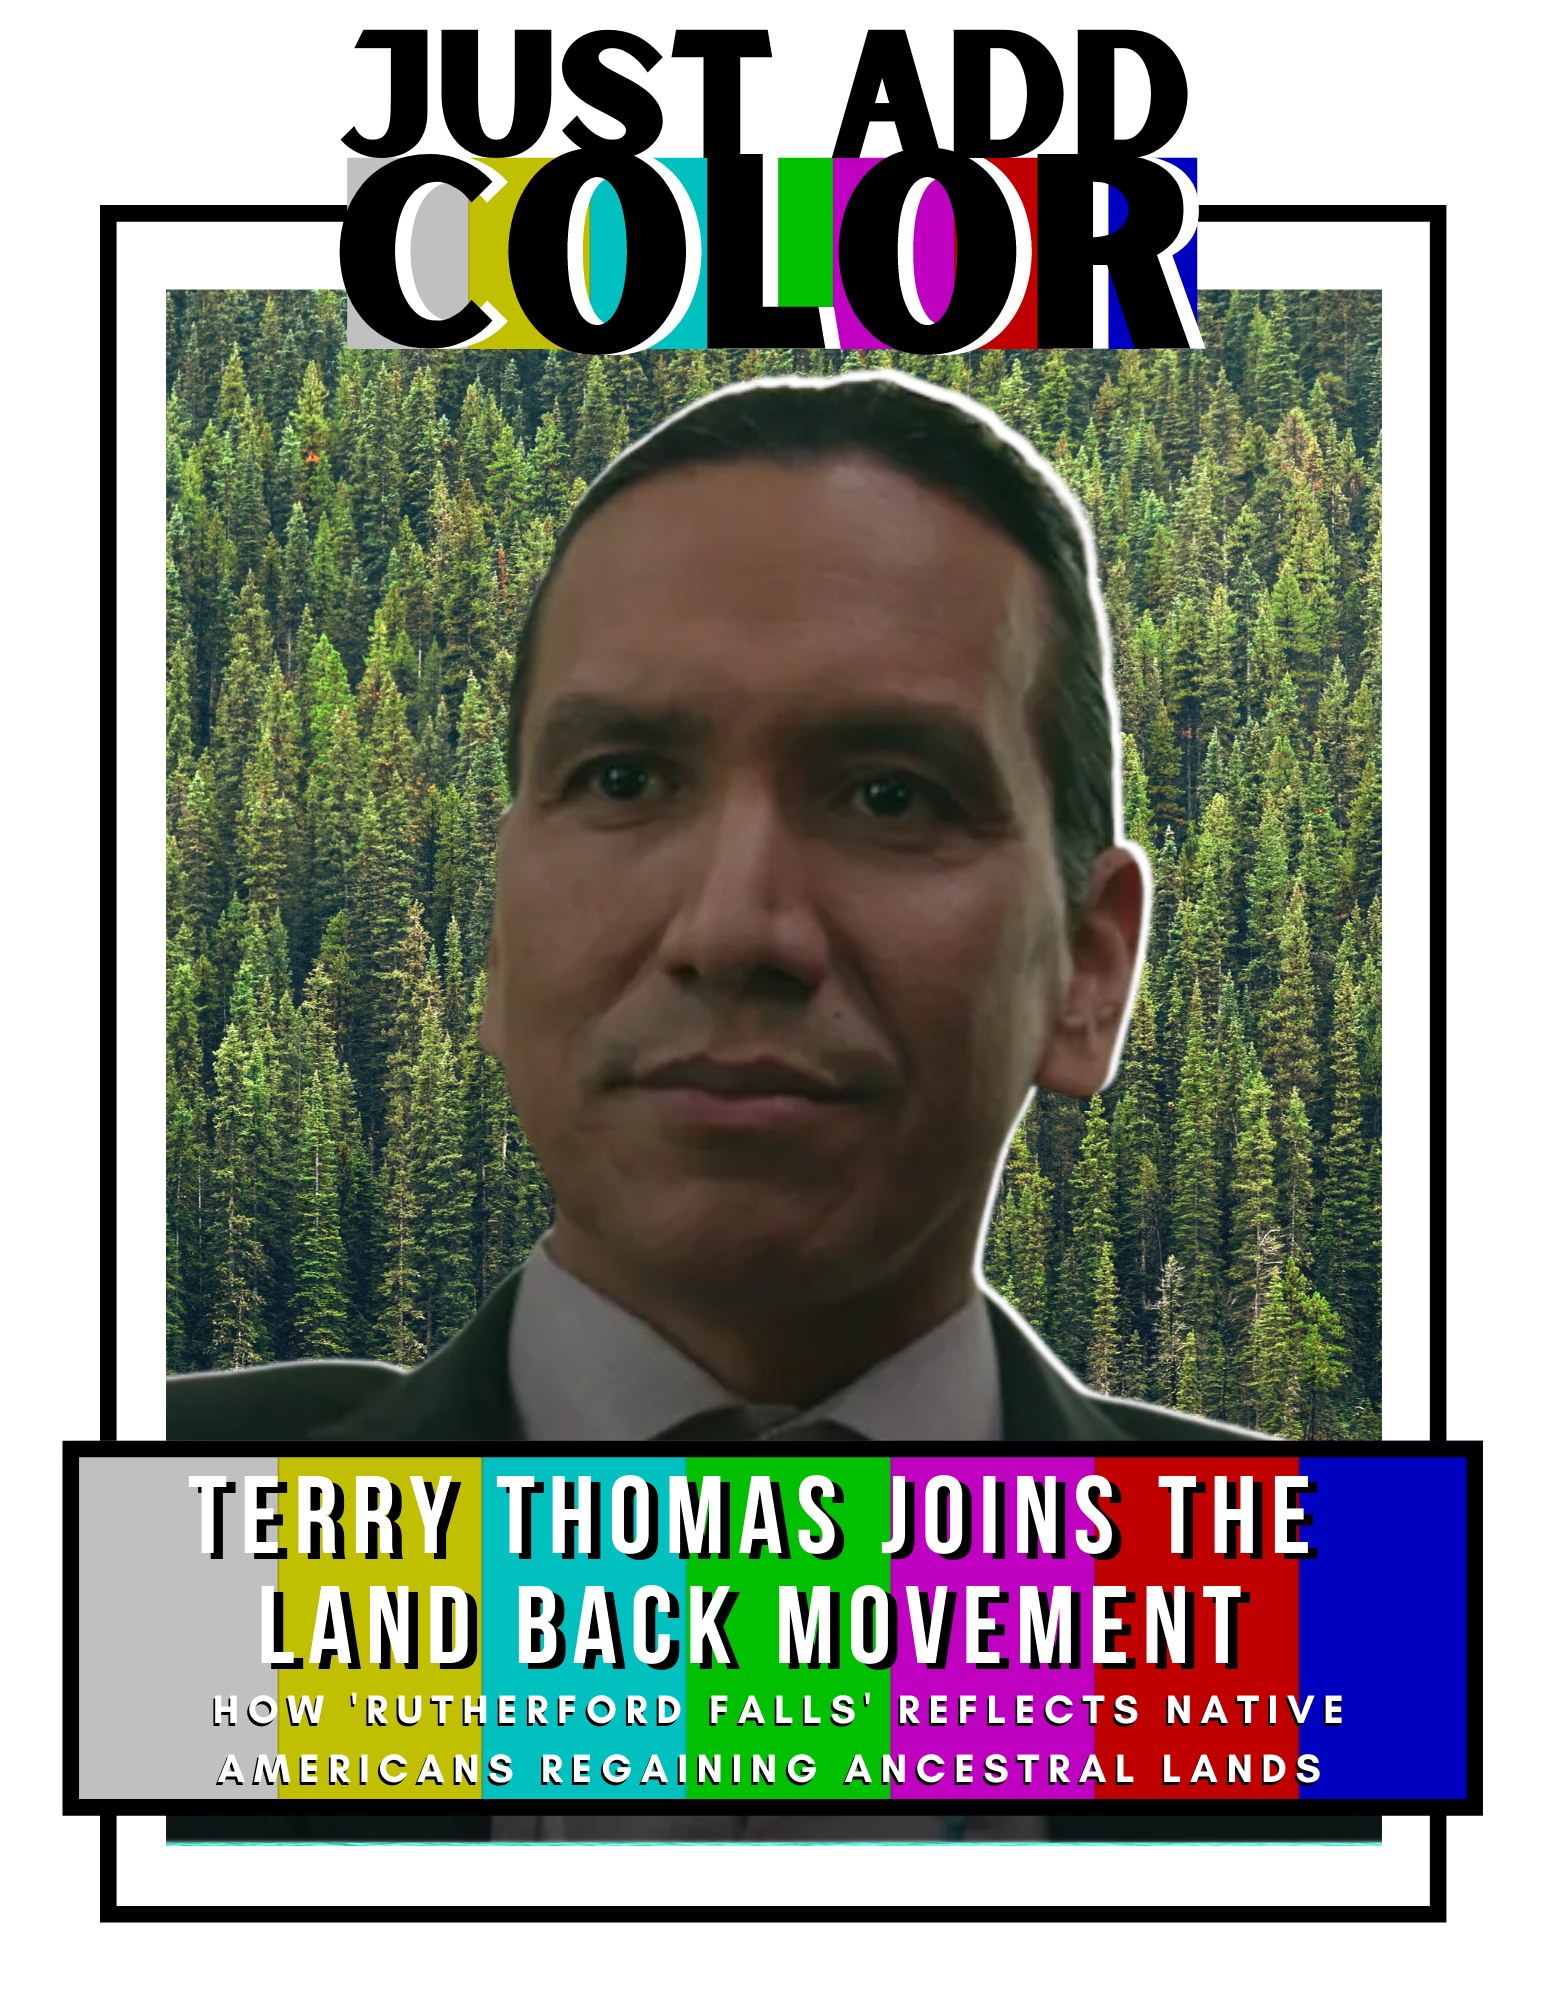 Terry Thomas joins the Land Back Movement